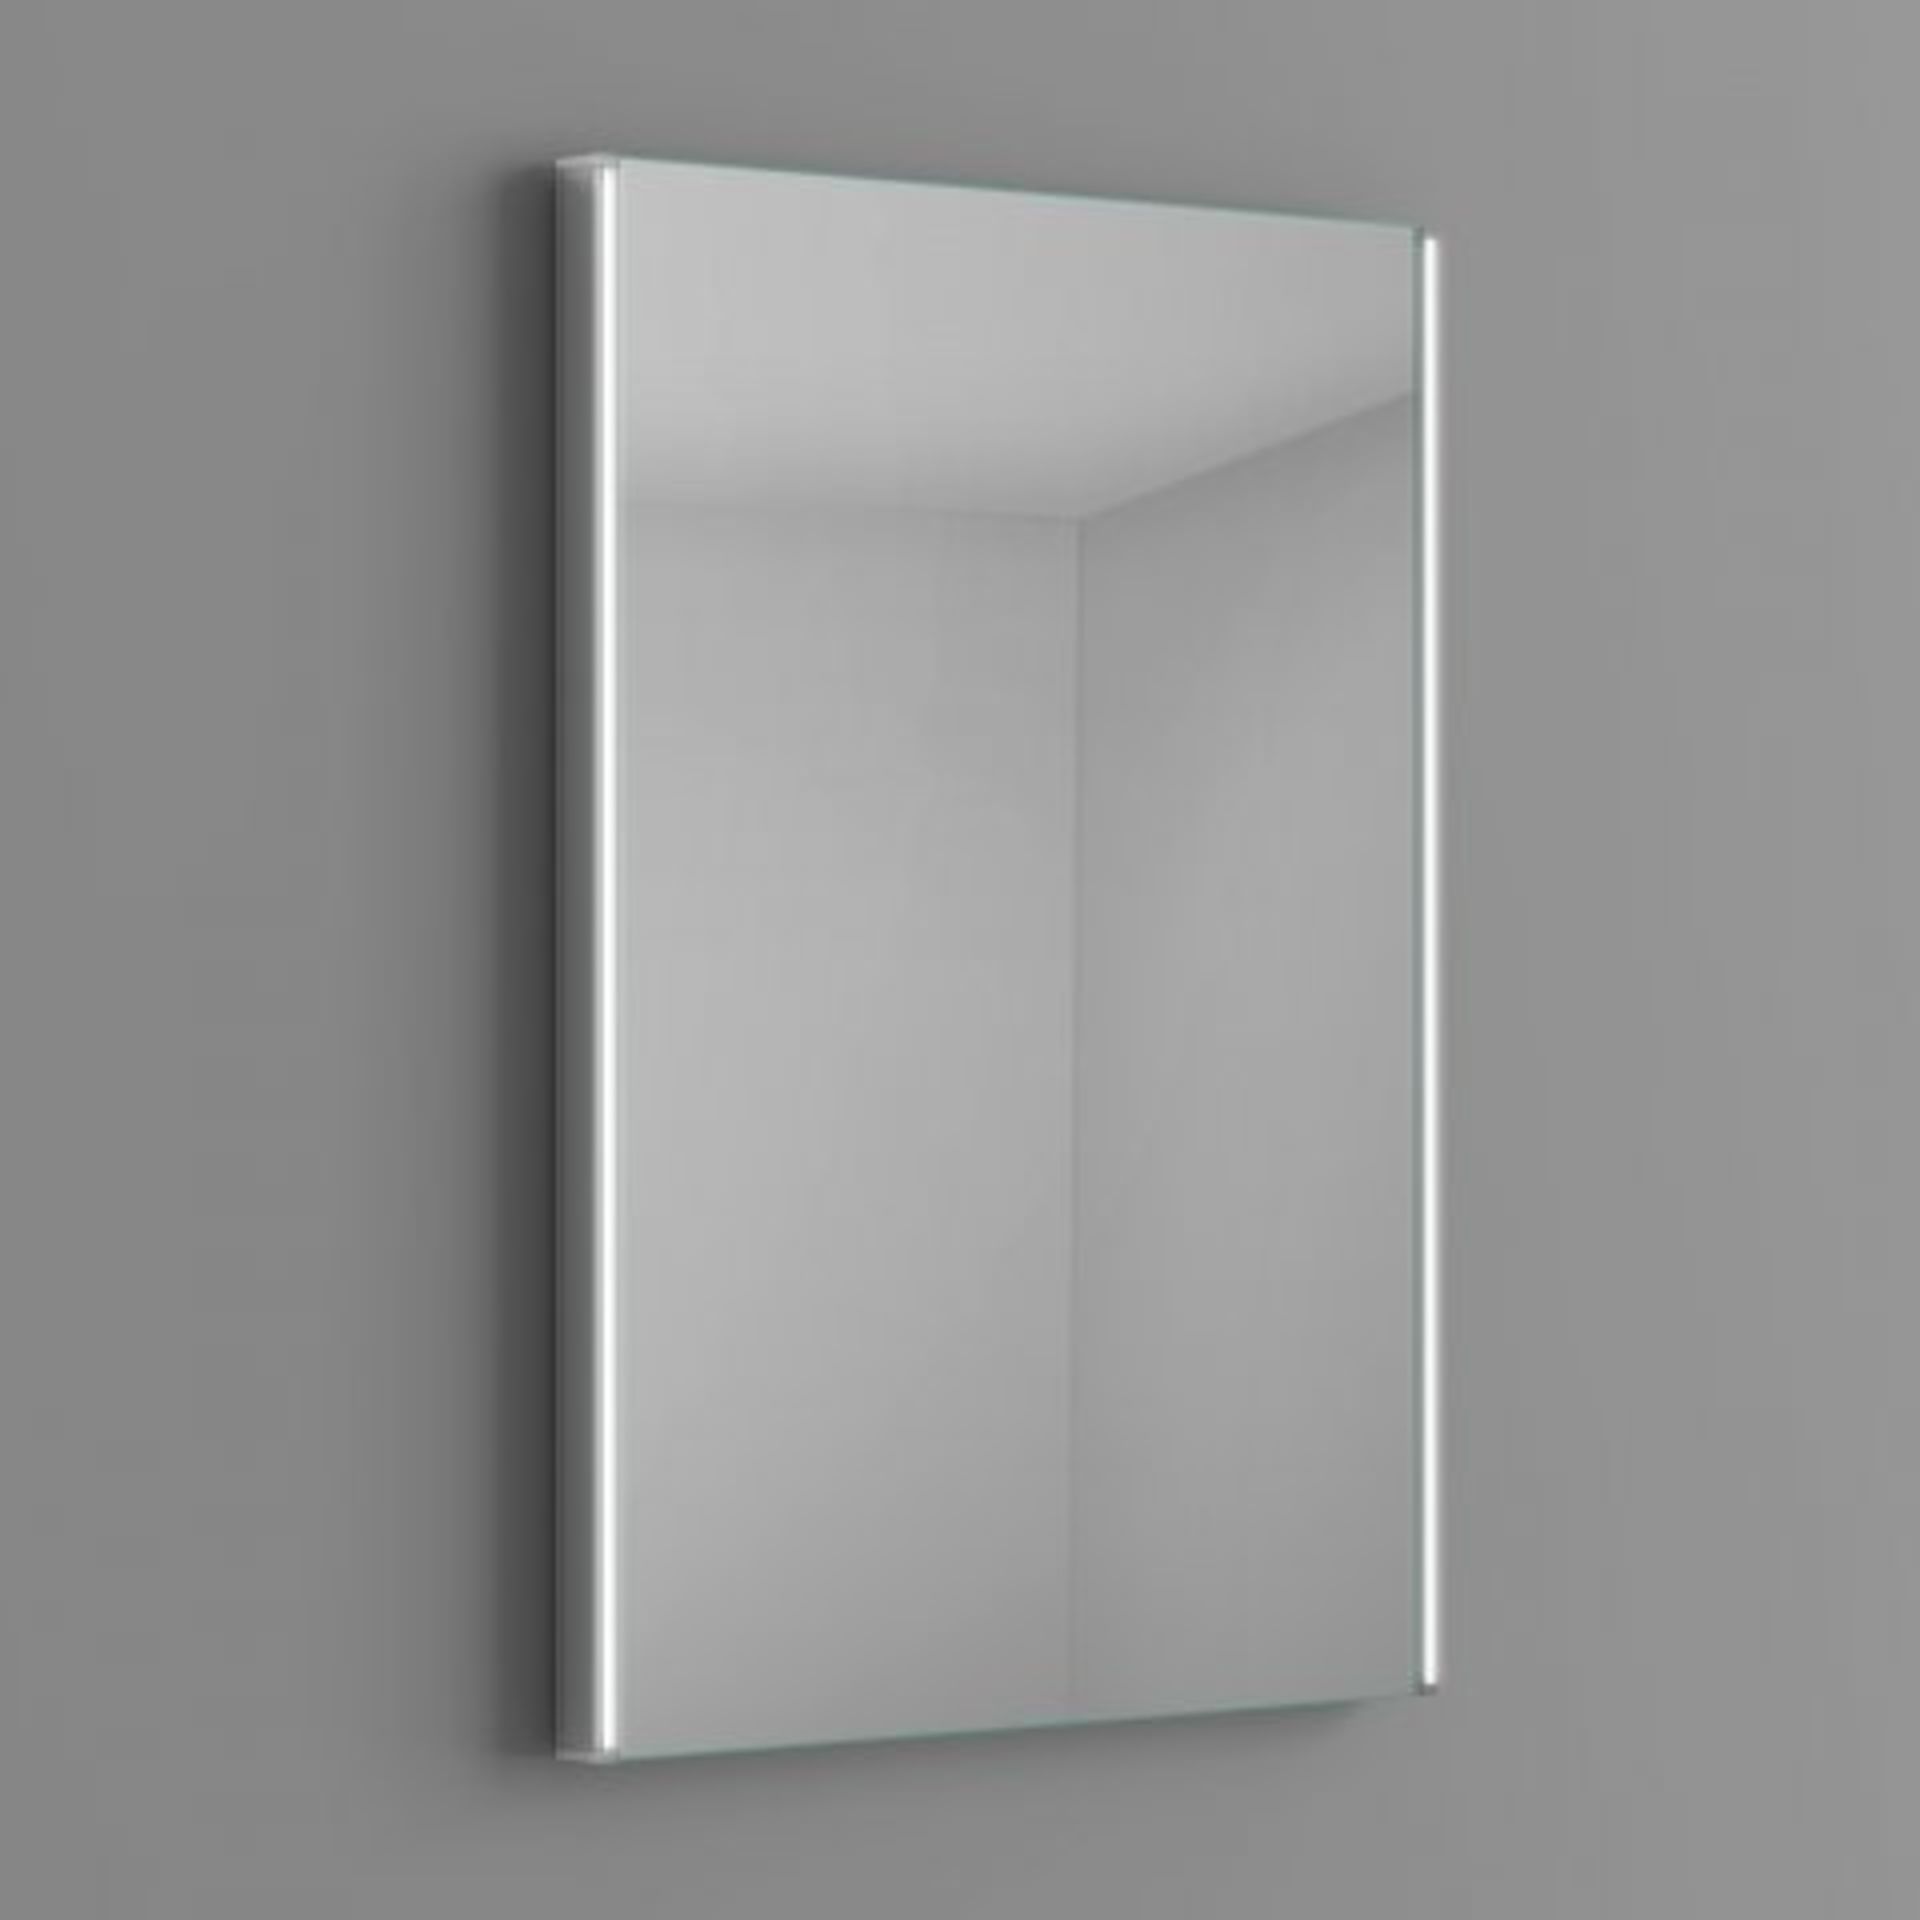 (N2) 500x700mm Lunar LED Mirror - Battery Operated Our ultra-flattering LED Battery Operated - Image 5 of 5